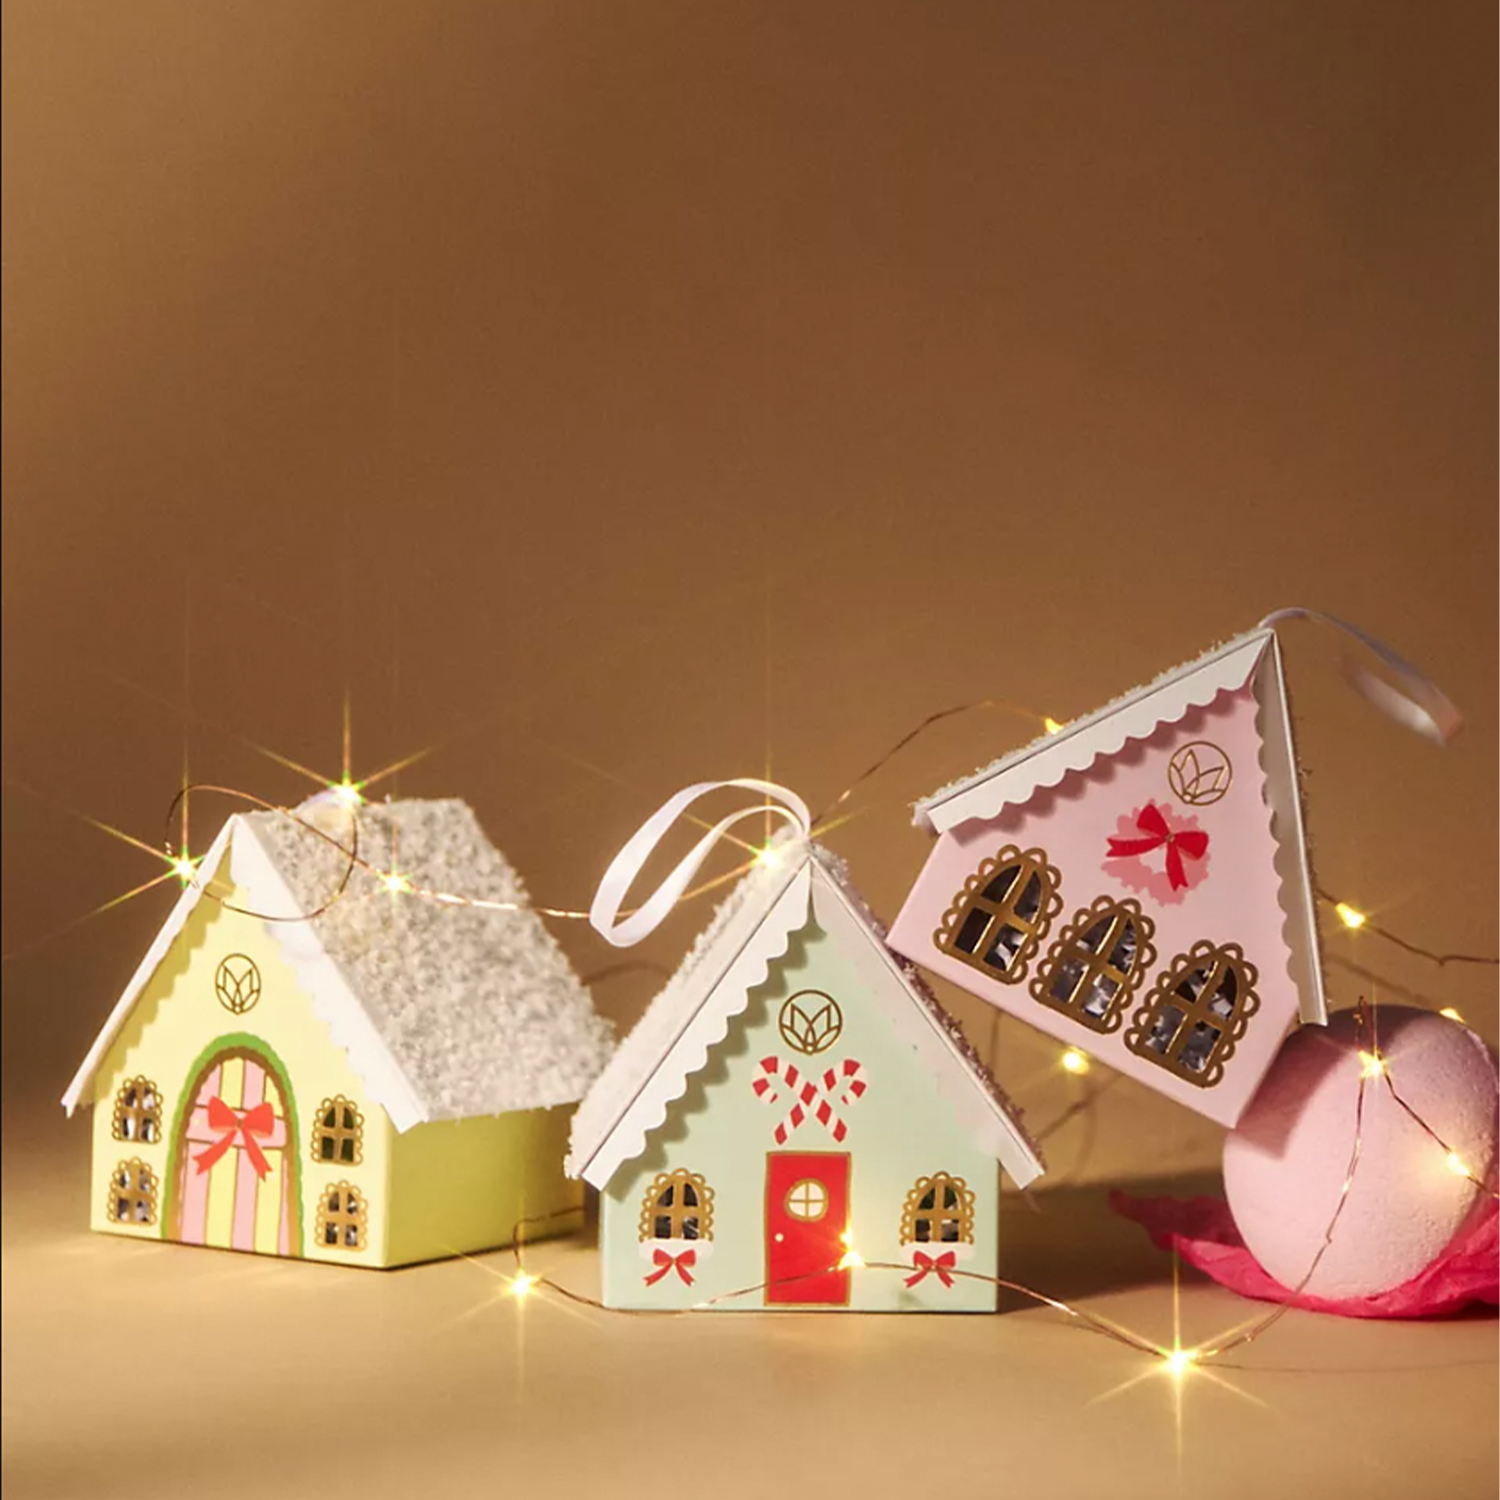 Village Ornaments with bath bombs